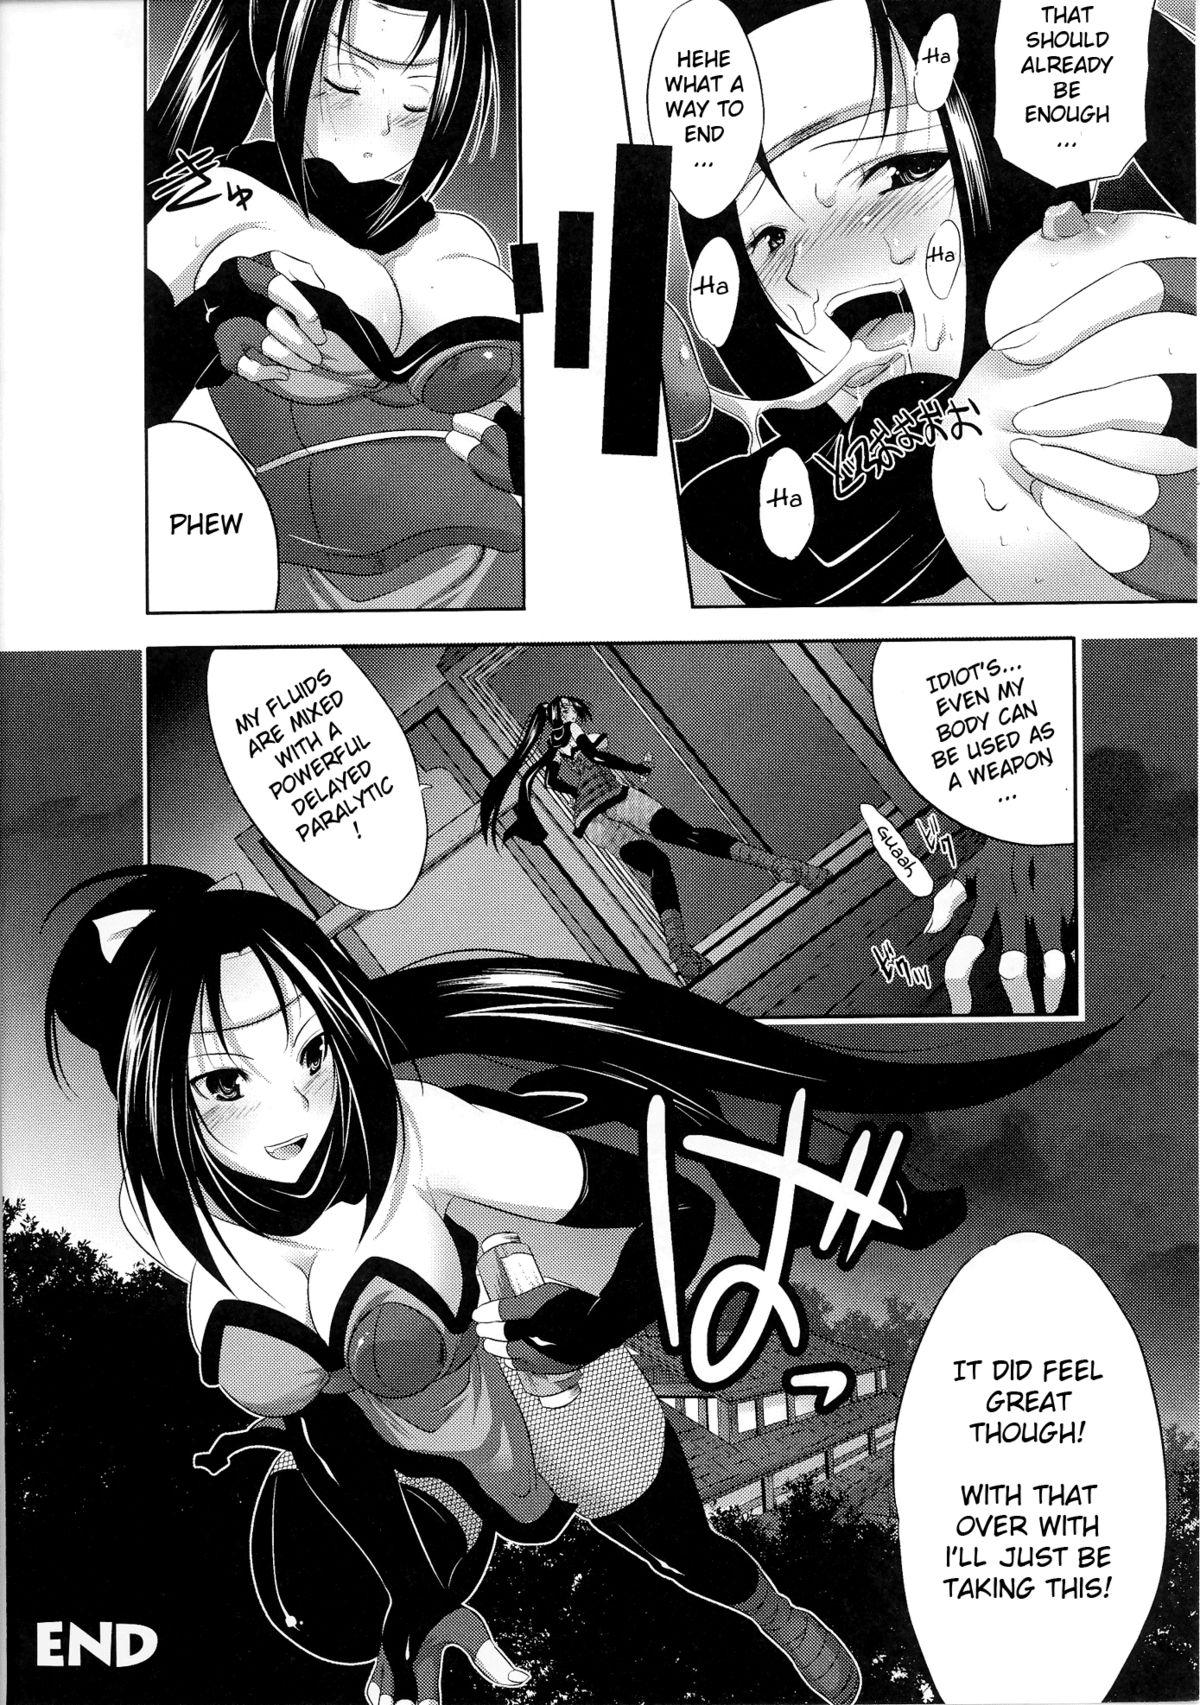 Pussylick Kunoichi - Indispensable Charming Eyes Strip - Page 16